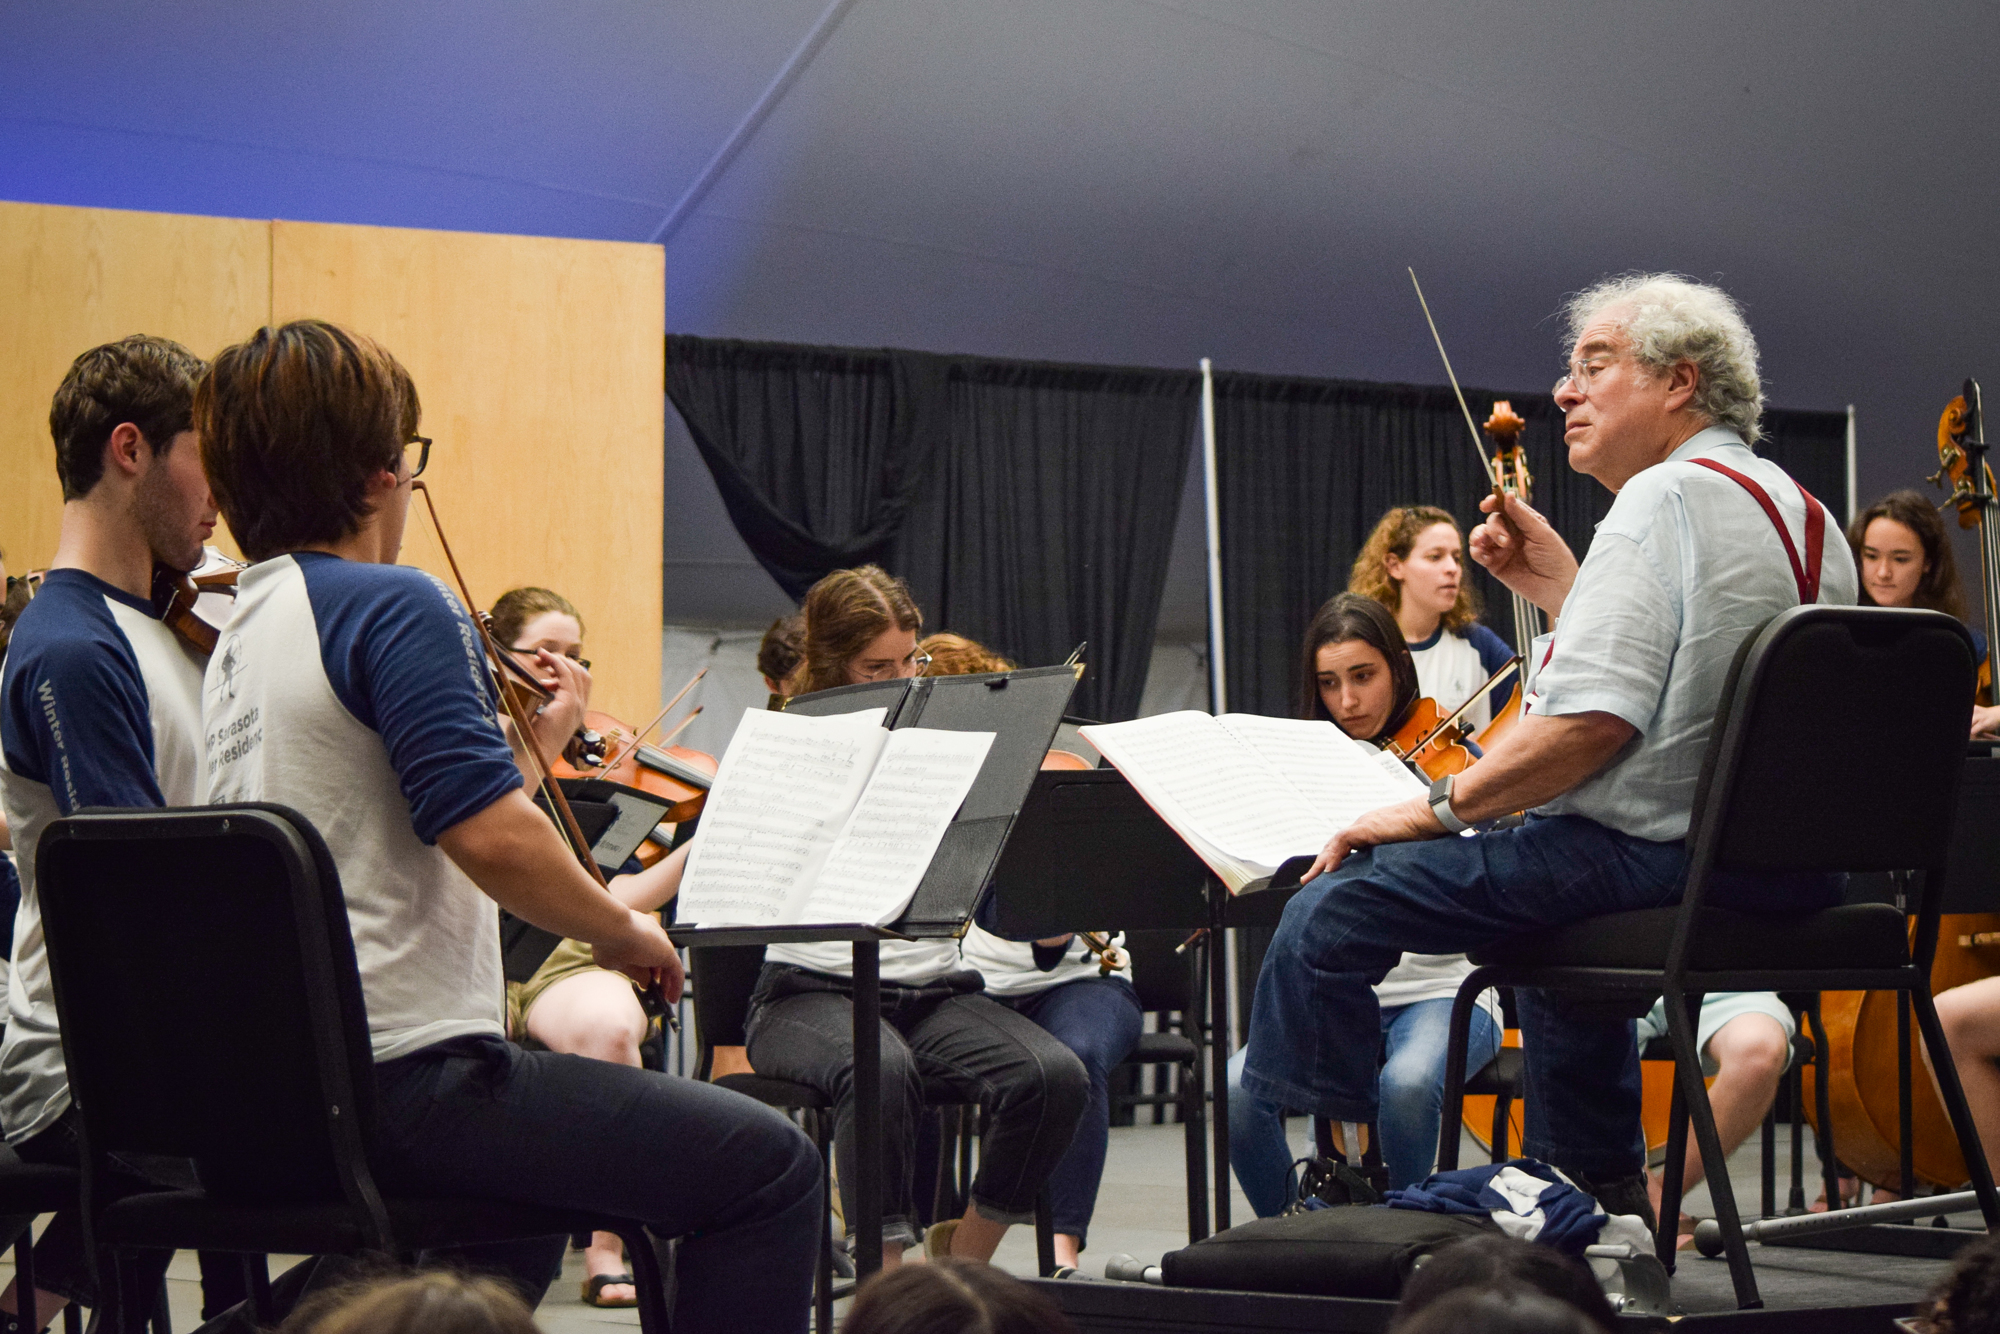 The audience can see and hear the rehearsal process  as Itzhak Perlman leads a start-and-stop rehearsal.